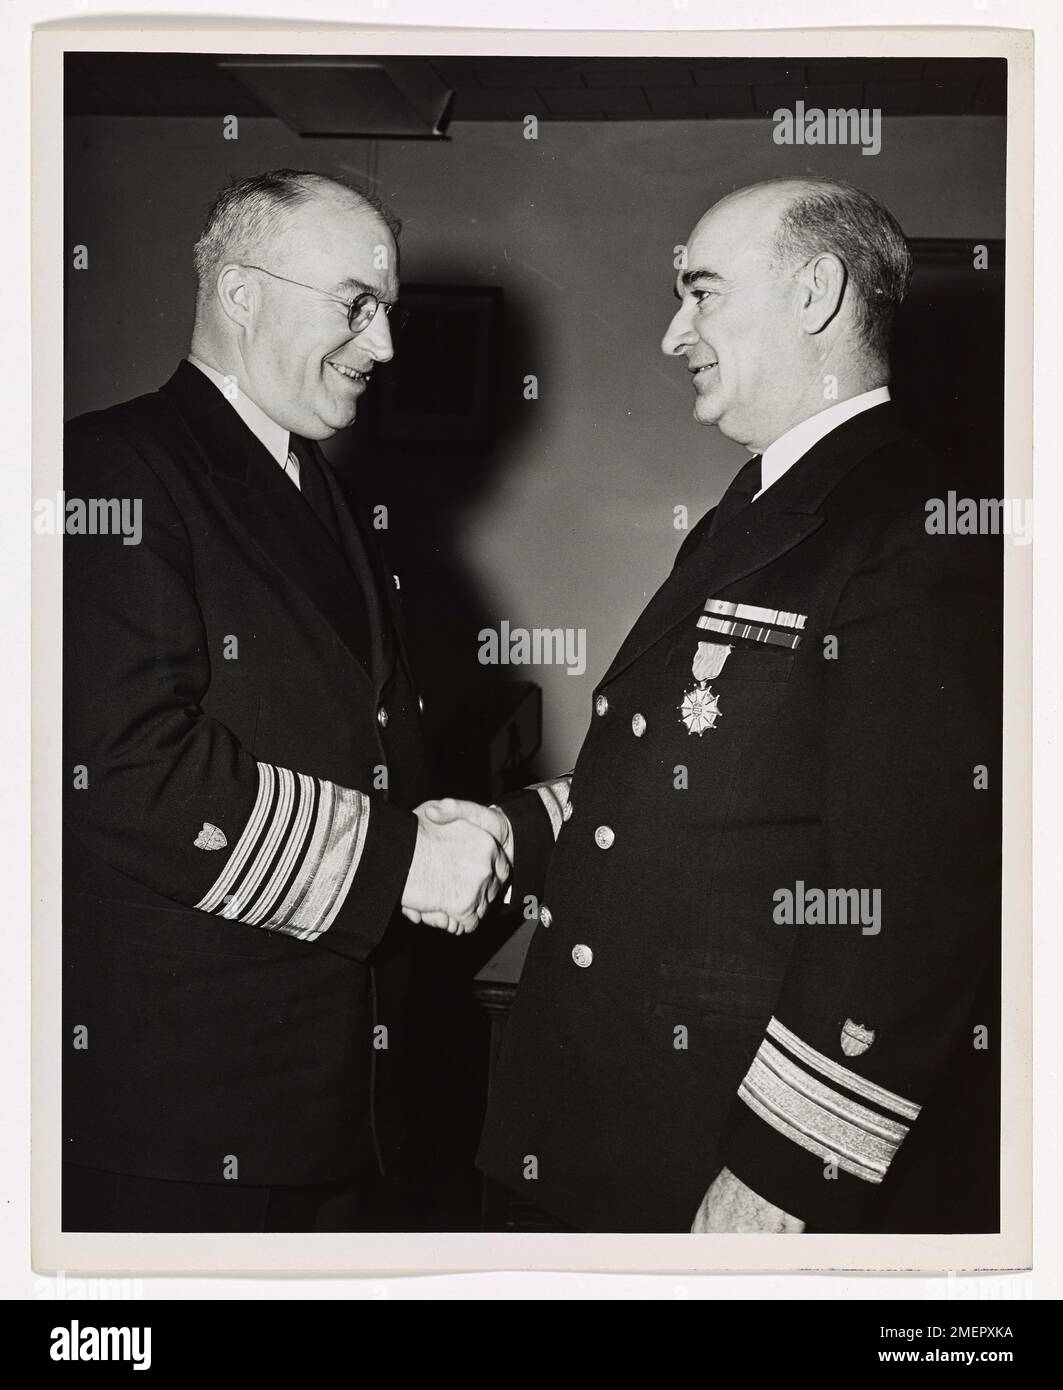 Washington Coast Guard Officer Awarded Legion of Merit. Admiral Joseph F. Farley, USCG, Coast Guard Commandant, shakes hands with Rear Admiral Frank J. Gorman, USCG, of Washington, D.C., Chief, Planning and Control Staff at Coast Guard Headquarters, after presenting him with a Legion of Merit. The medal was awarded to Rear Admiral Gorman by James Forrestal, Secretary of the Navy, in recognition of his outstanding services to the United States Government as the Coast Guard's Chief Finance and Supply Officer; and his assistance to the Commandant as special adviser on matters of organization, leg Stock Photo